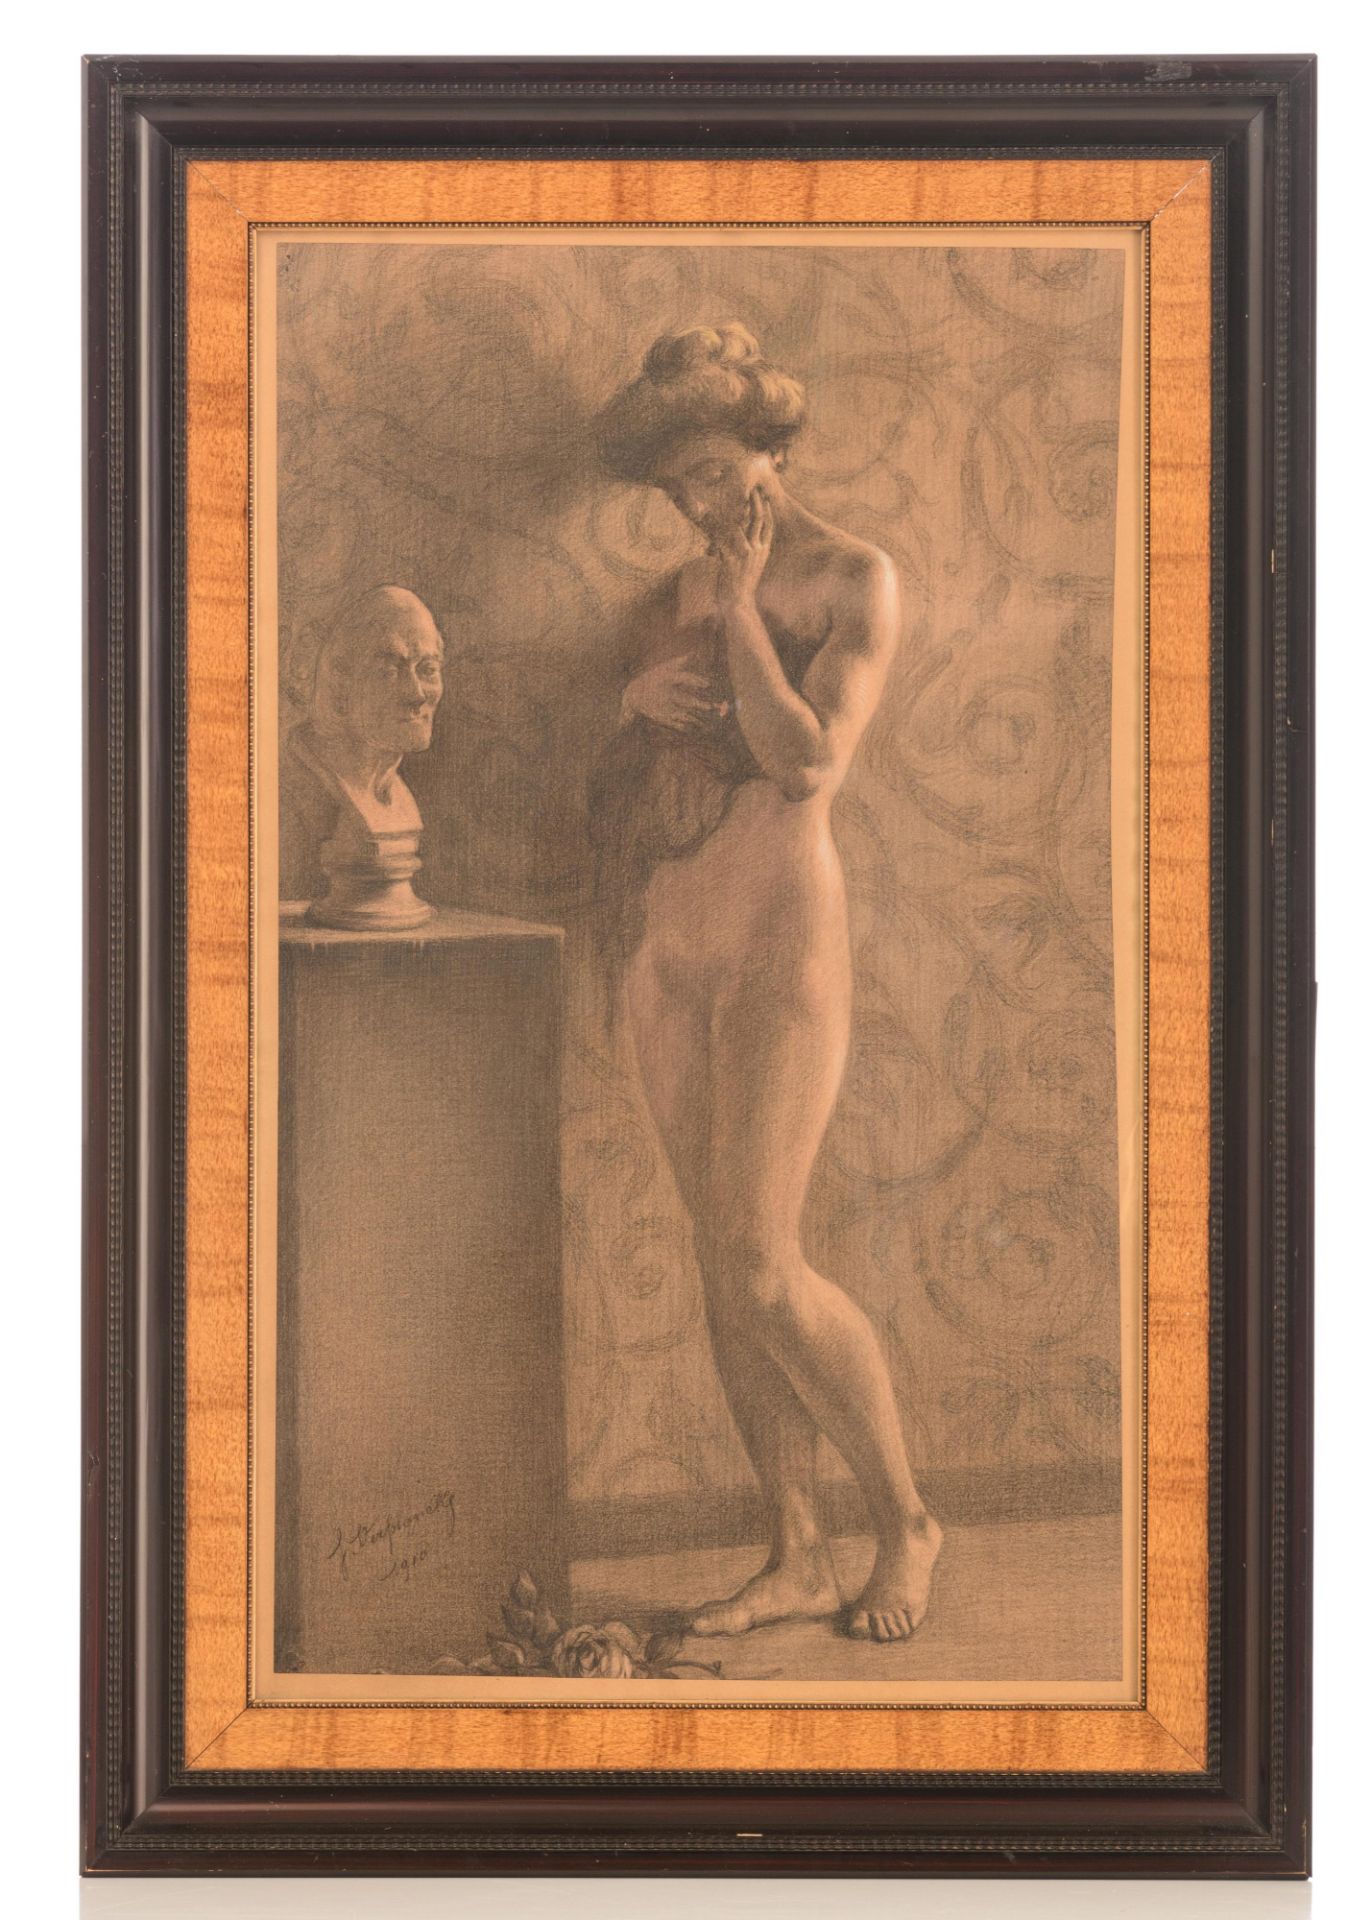 Verplancke, a standing nude in contemplation before a bust of Voltaire, 69 x 42 cm - Image 2 of 5